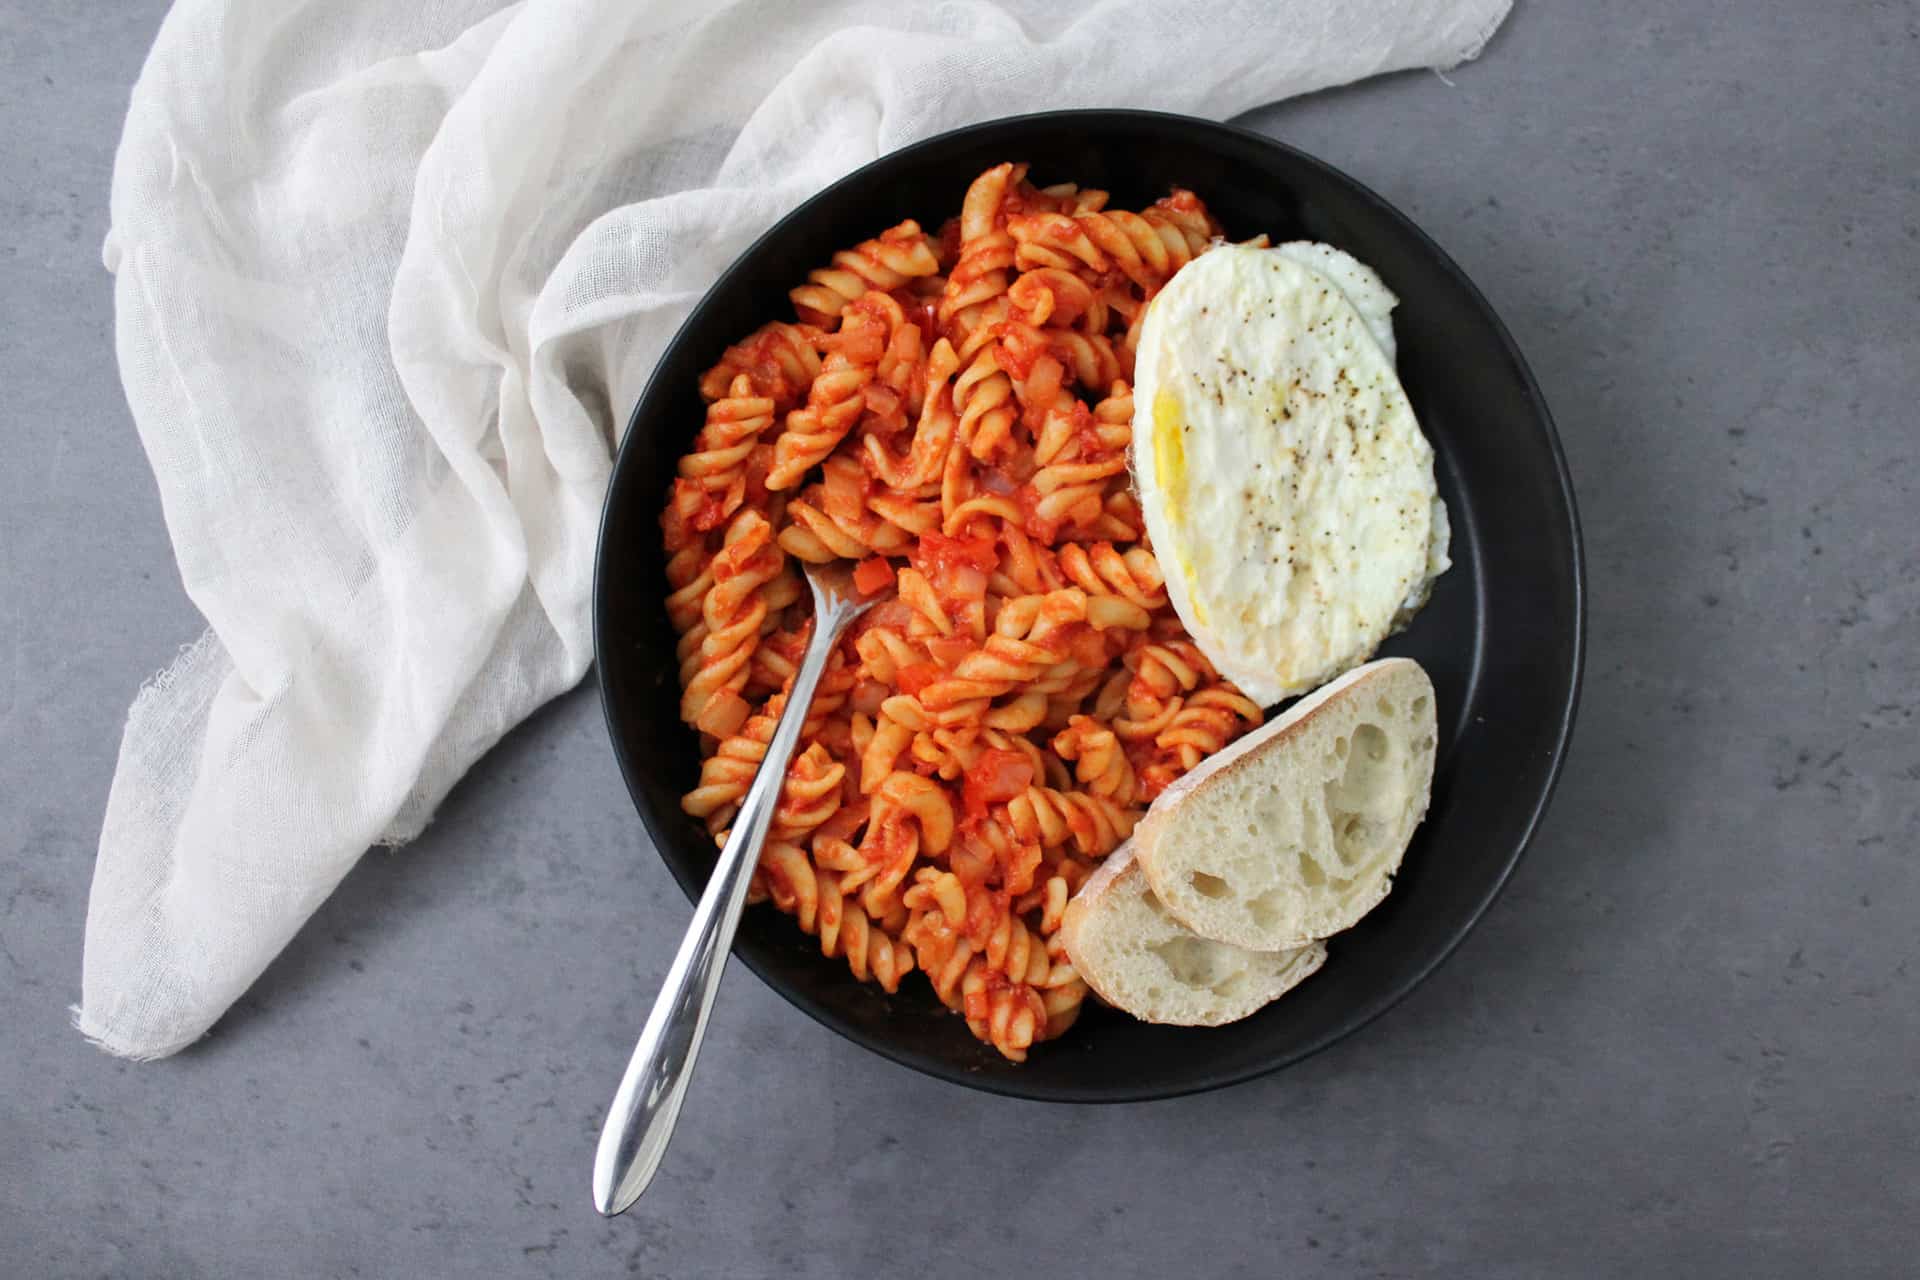 Shakshuka pasta dinner with a fried egg and bread in a bowl